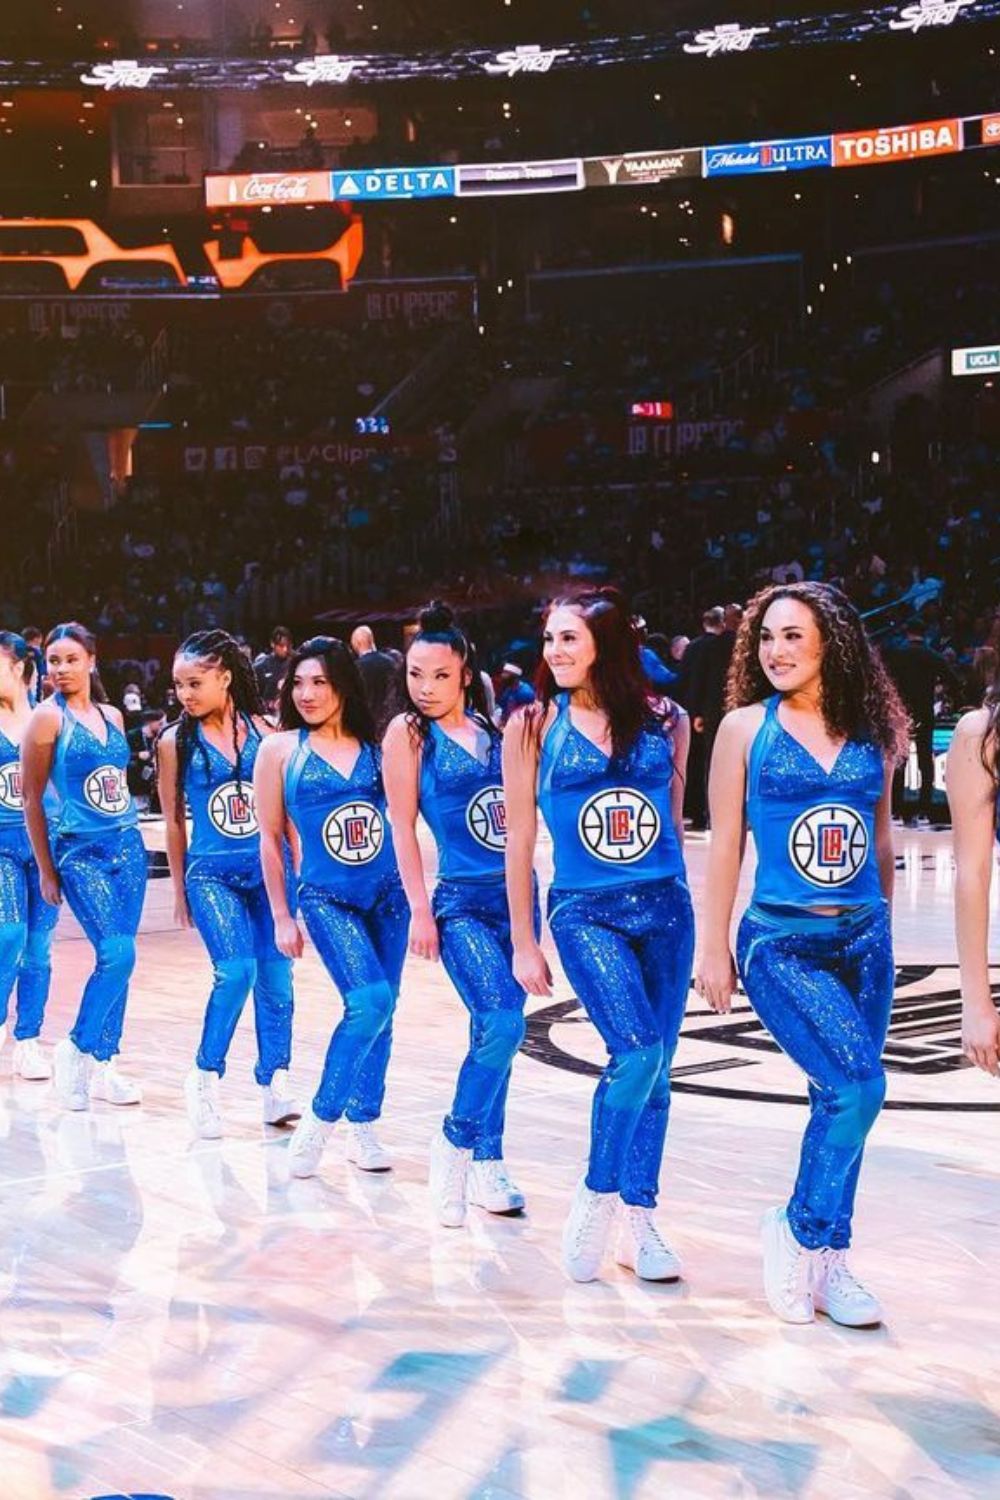 Los Angeles Clippers Dancers (Source: Instagram)